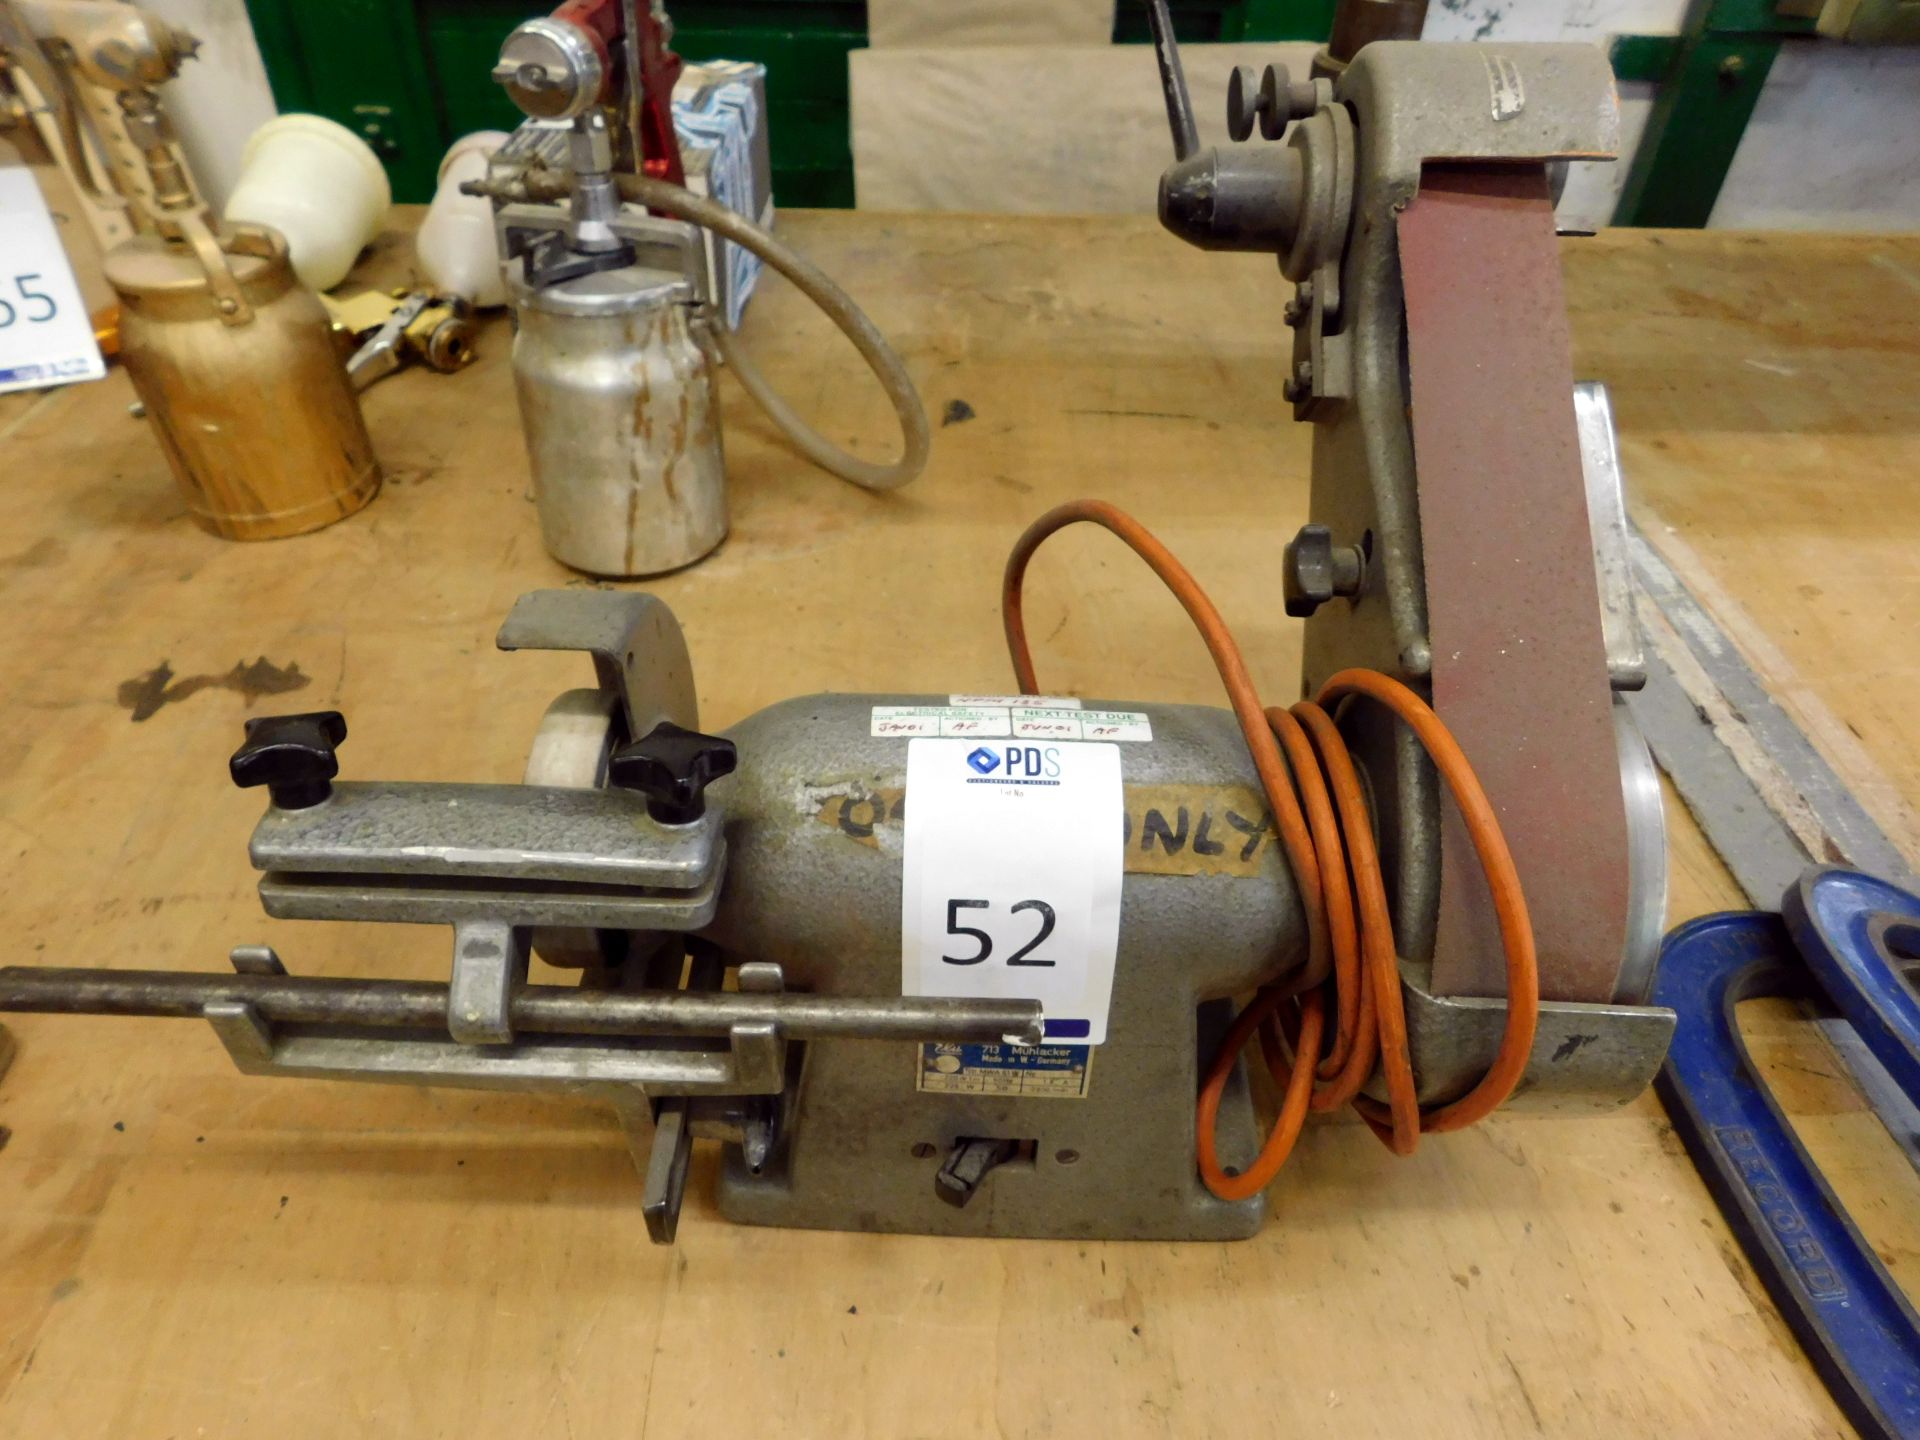 Elu 713 Combination Linisher & Grinder (Located Bethnal Green – Please see General Notes for More